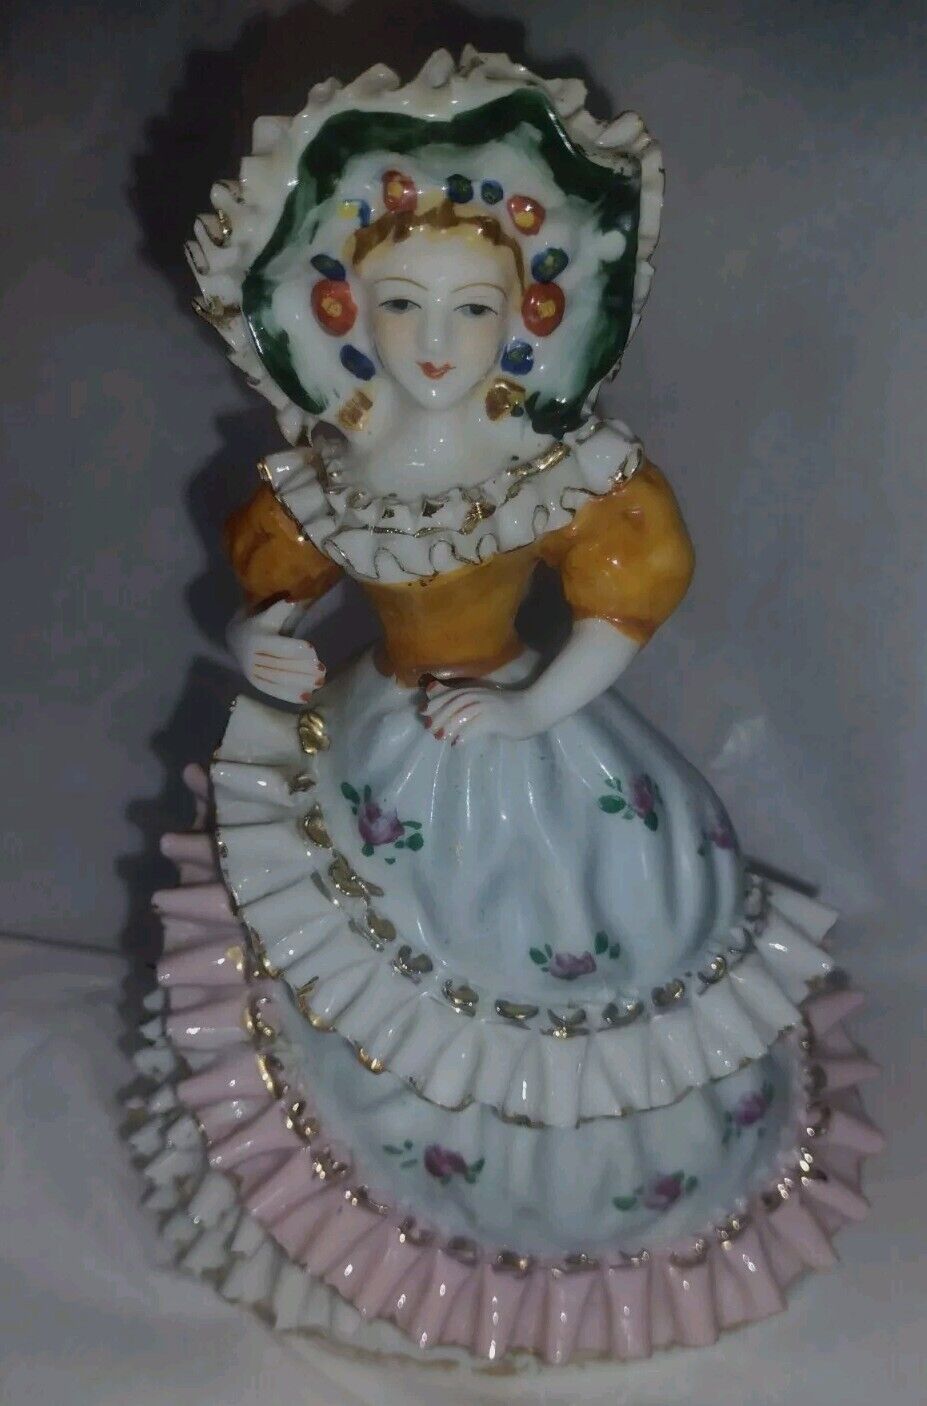 Vintage Urion Occupied Japan Lady Figurine Handpainted Ruffled Ball Gown